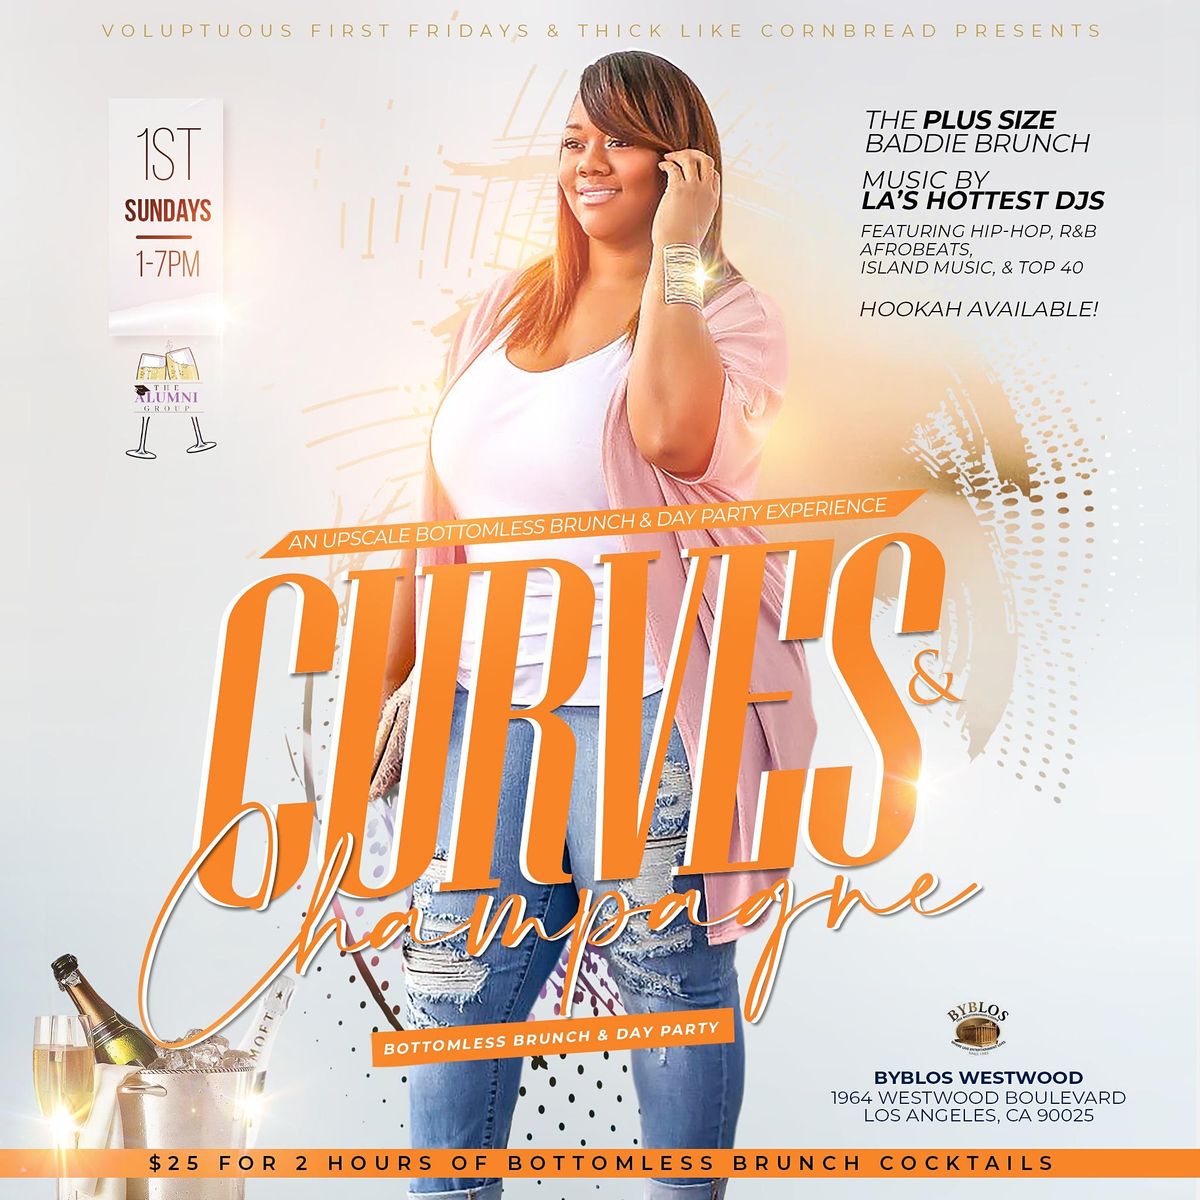 Curves & Champagne - Bottomless Brunch & Day Party L.A. Edition